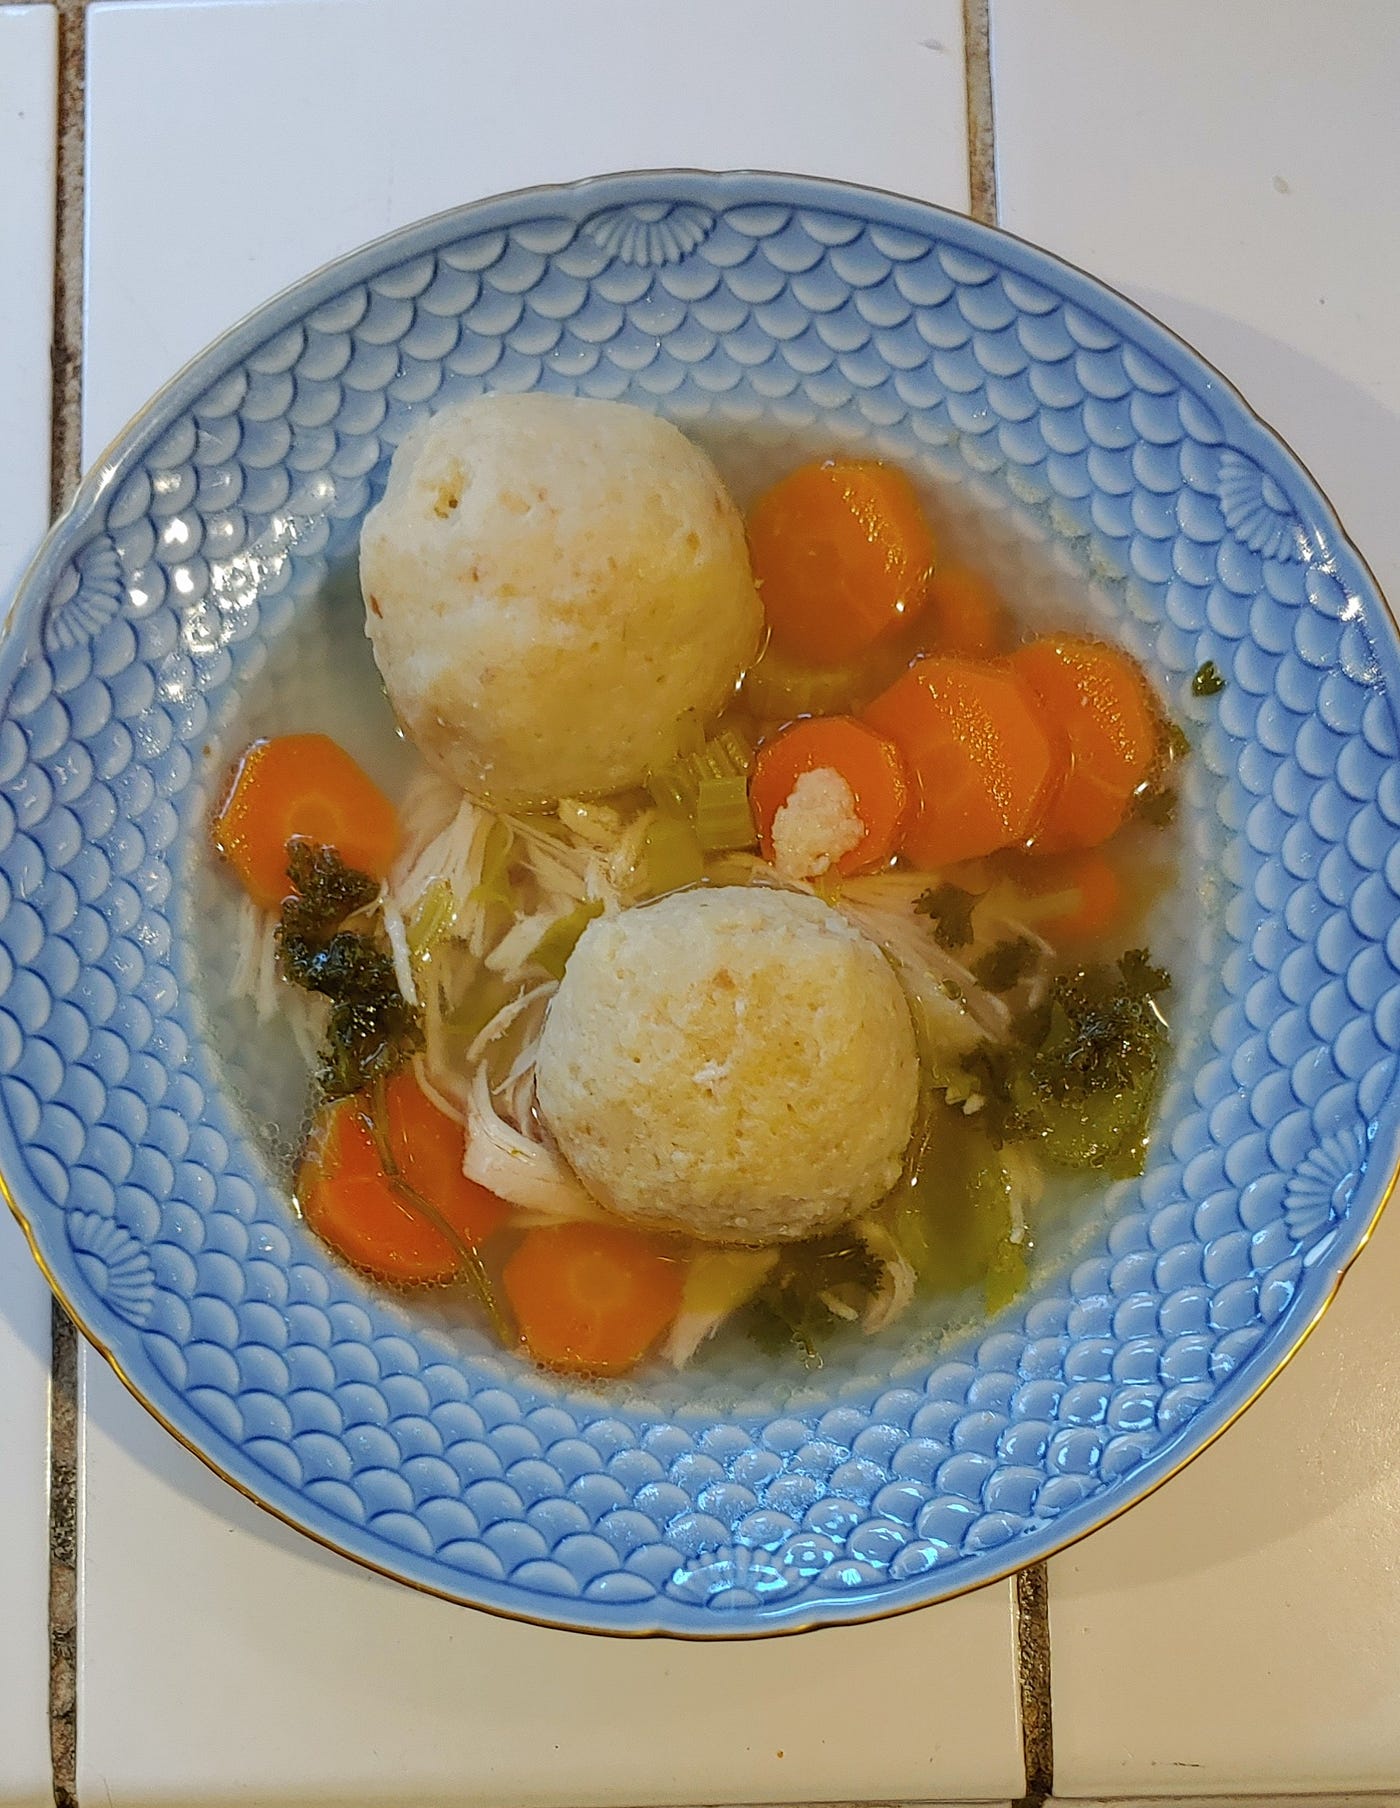 Are Your Matzo Balls Sinkers or Floaters, an Age-Old Debate, by Moryt Milo, Writers' Blokke